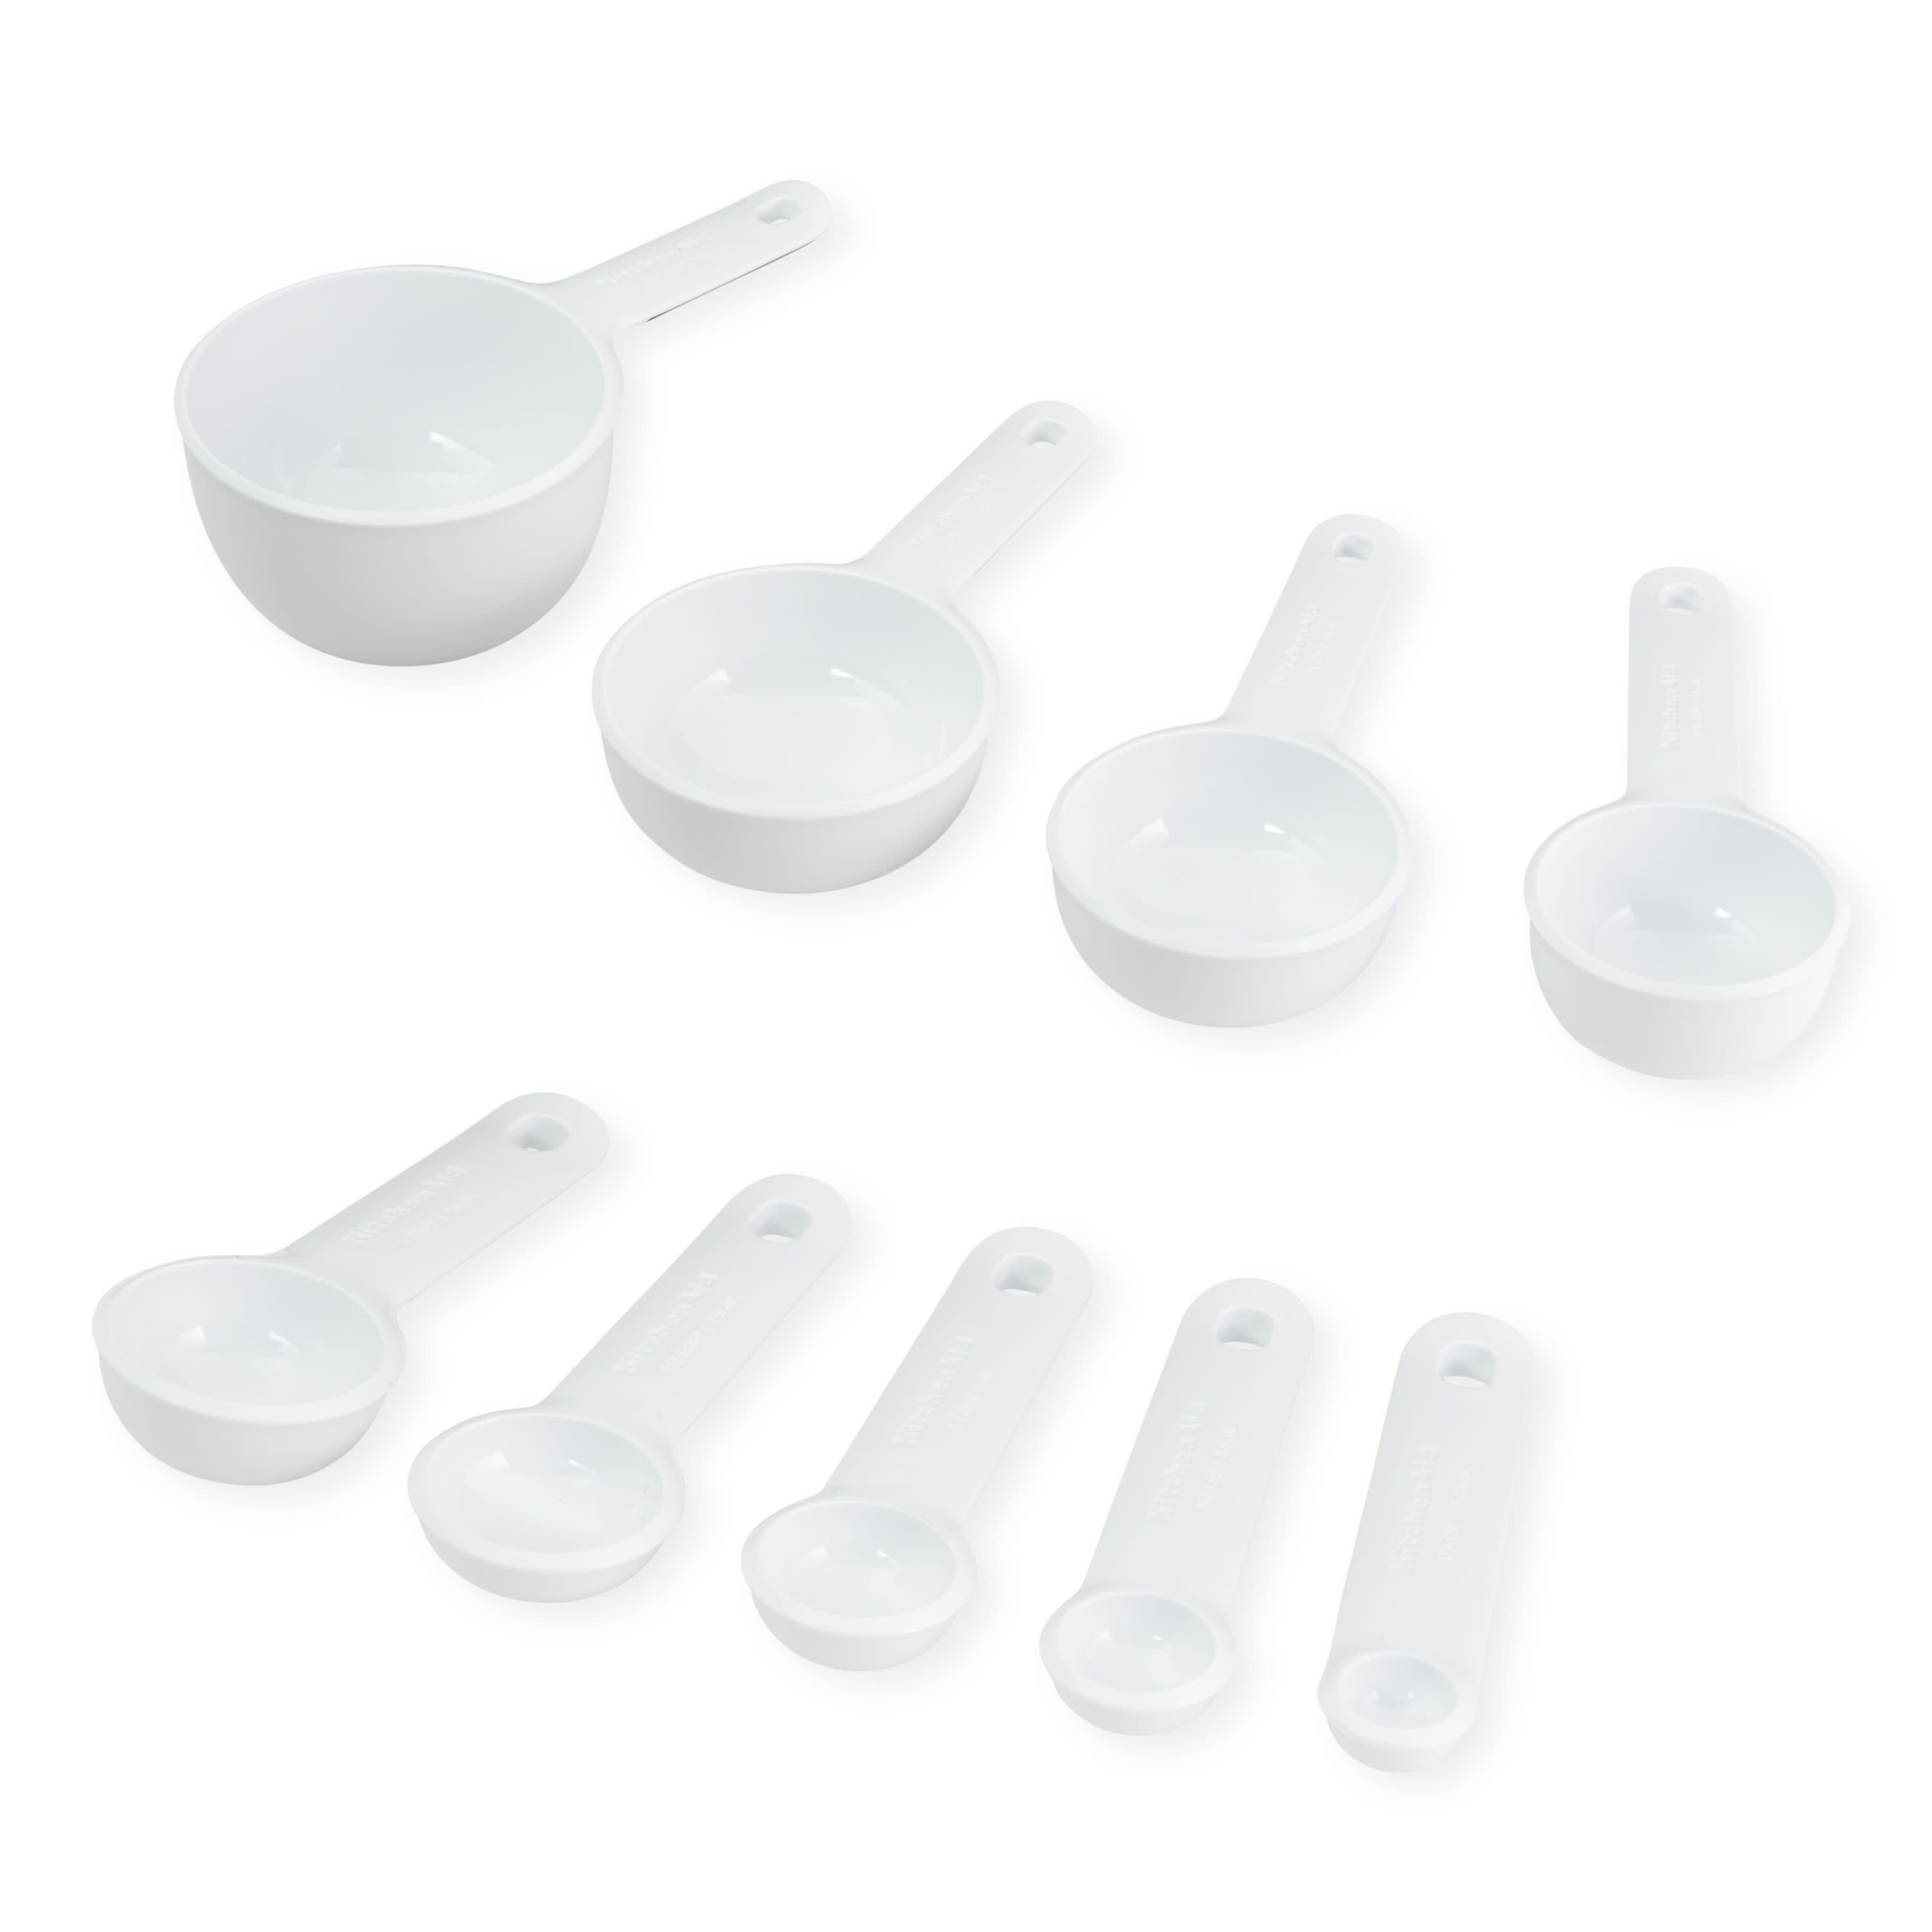 Measuring Spoons (Set of 4) by Crestware – The Essential Things